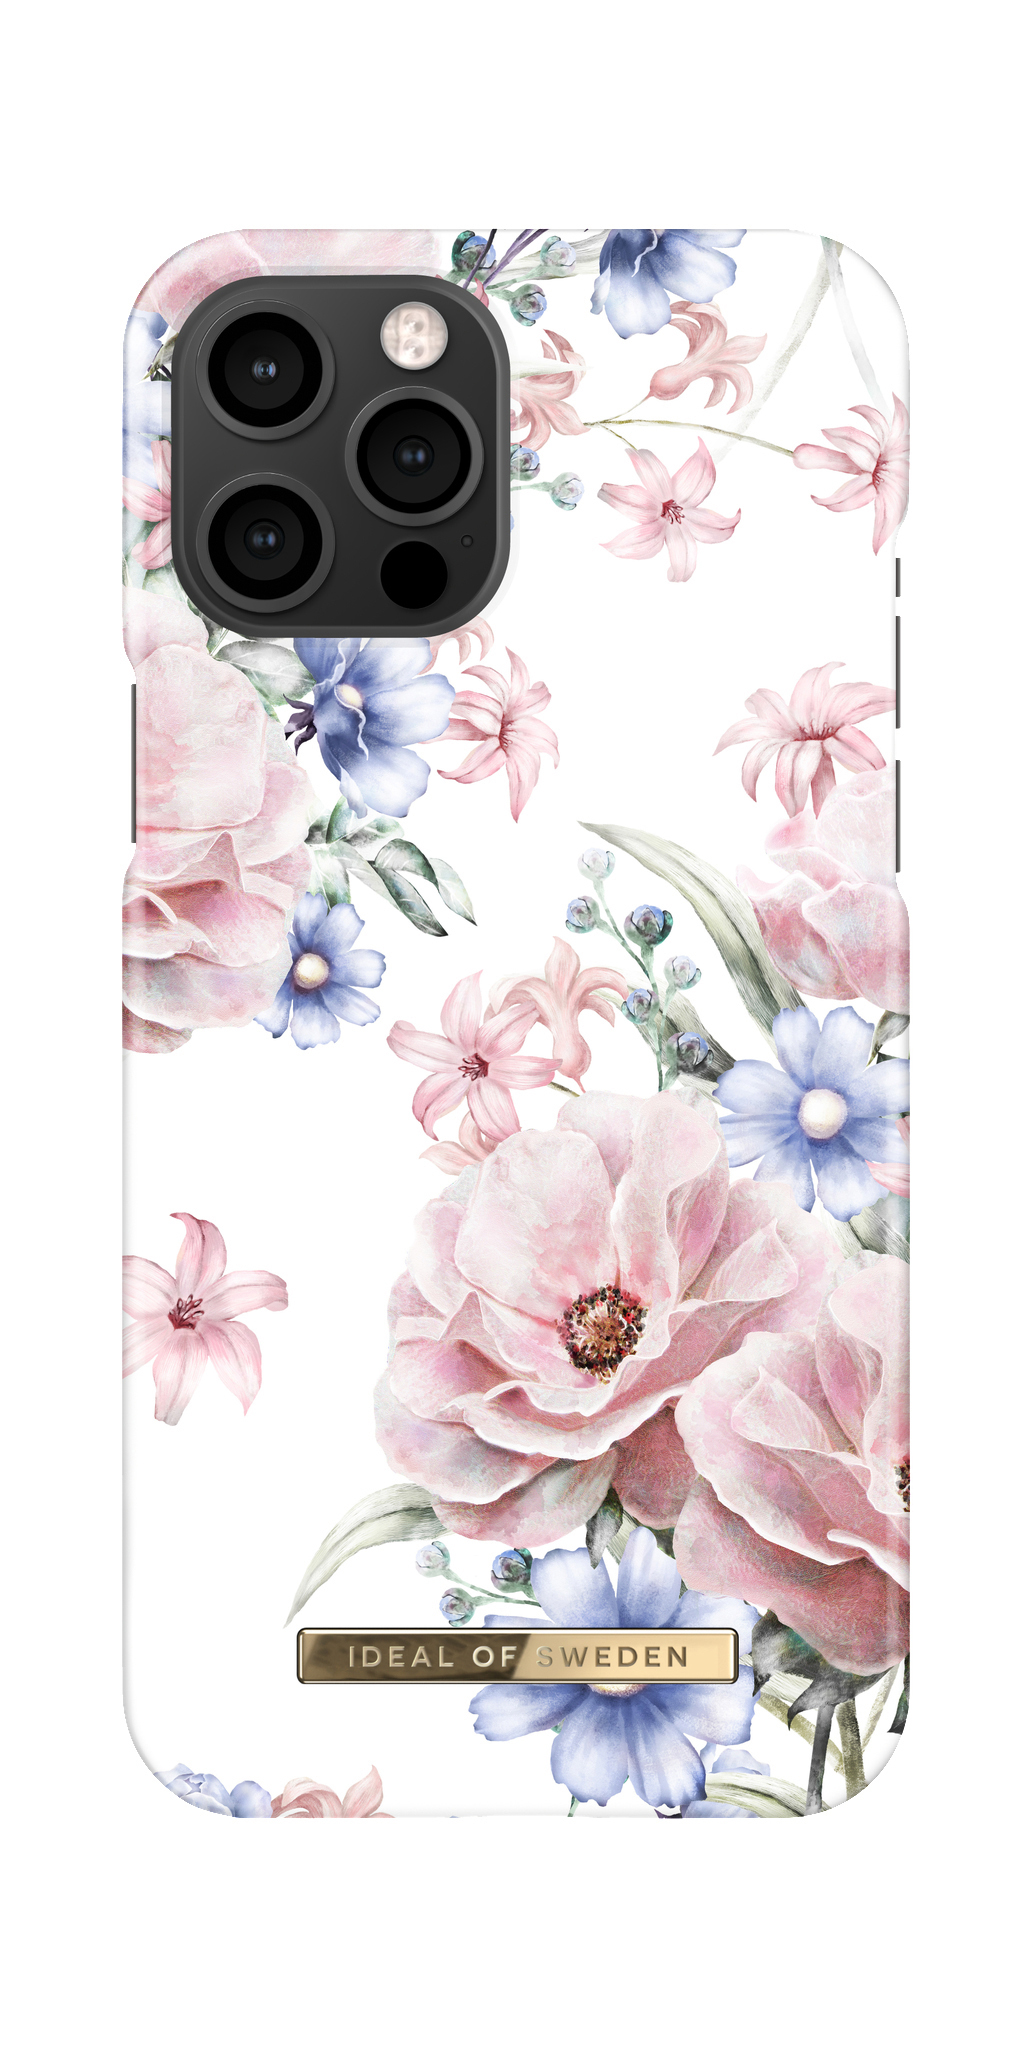 Pro IDEAL 12 Fashion OF SWEDEN Floral iPhone Apple, Max, Backcover, Romance Case,